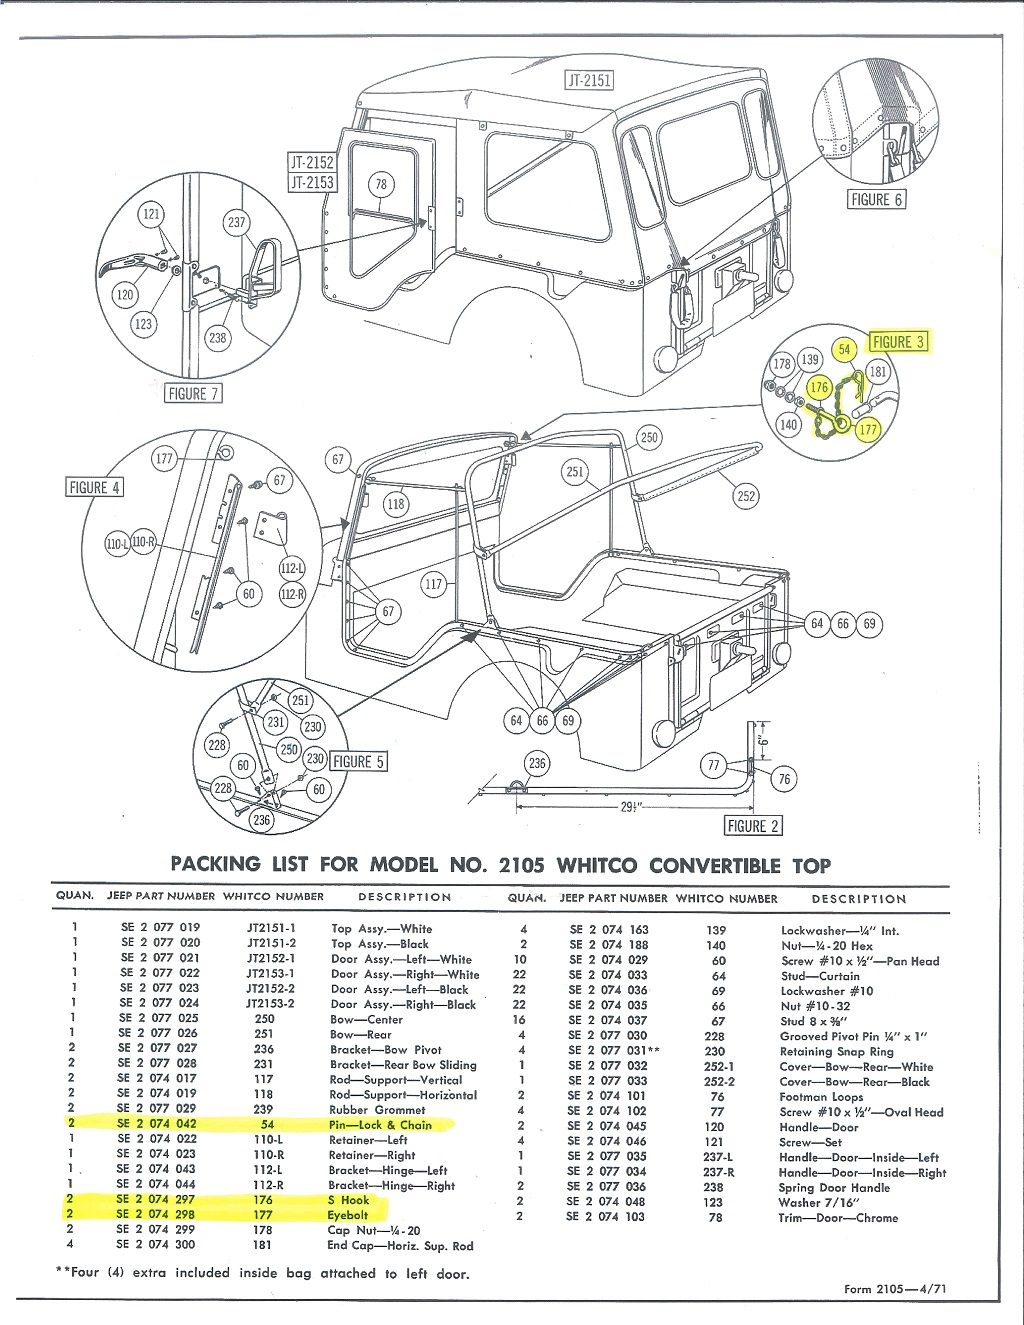 Whitco top parts needed 20211019.jpg